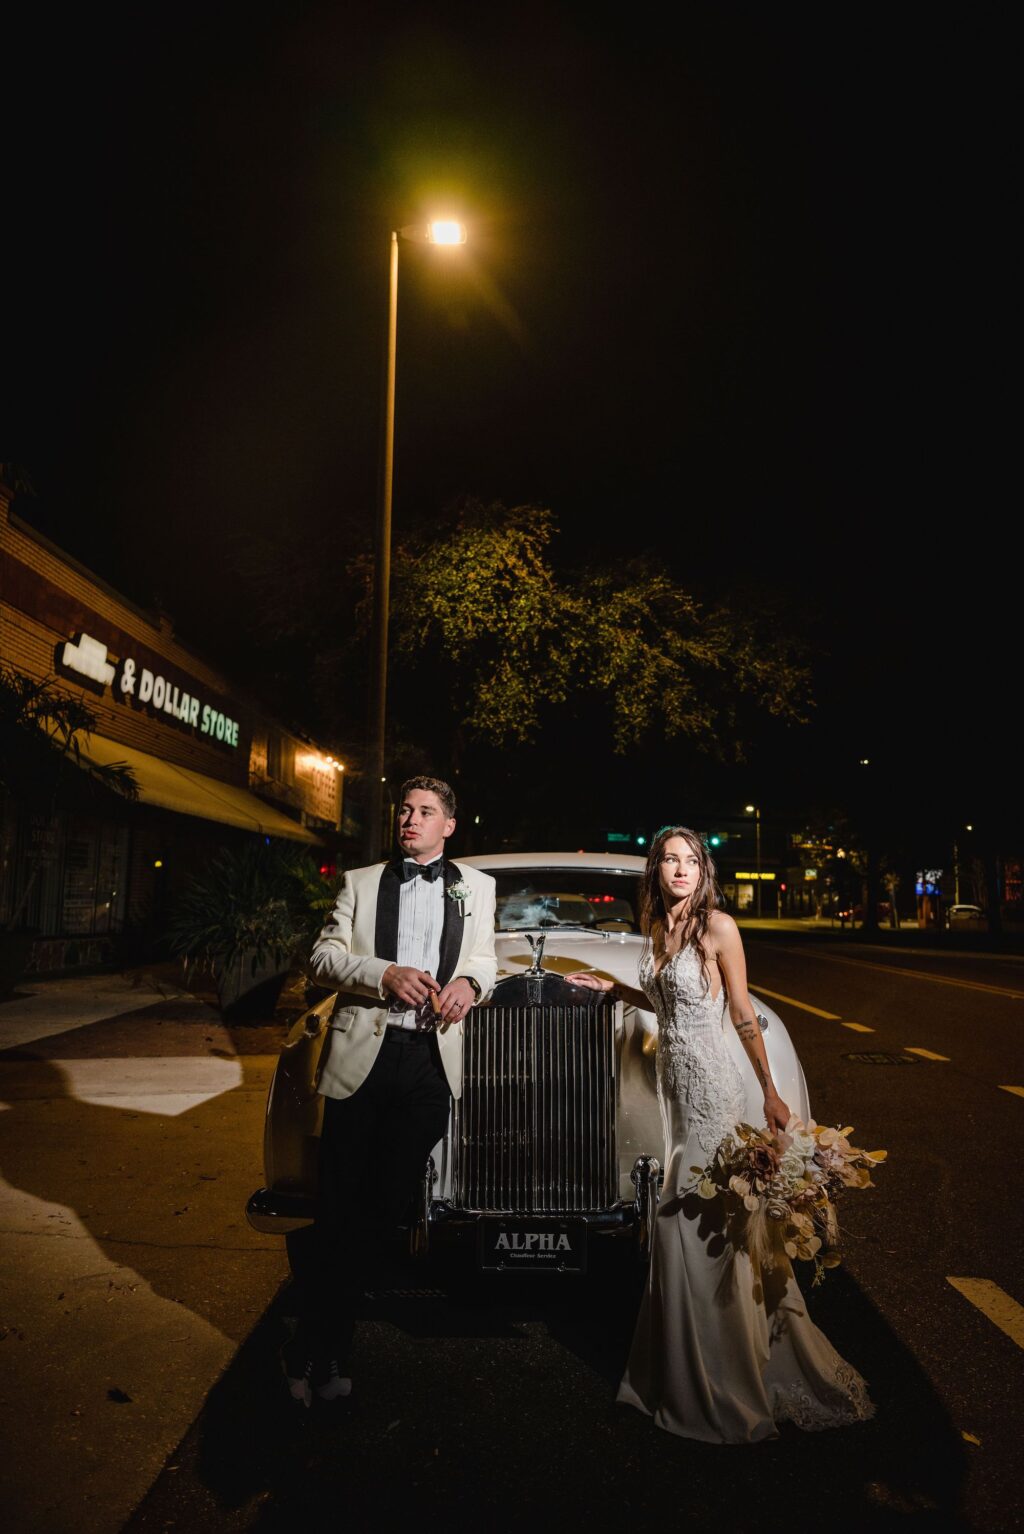 Bride and Groom Rolls Roycew Vintage Car Wedding Exit Portrait Great Gatsby Inspired Theme | Tampa Bay Wedding Photographer and Videographer Iyrus Weddings